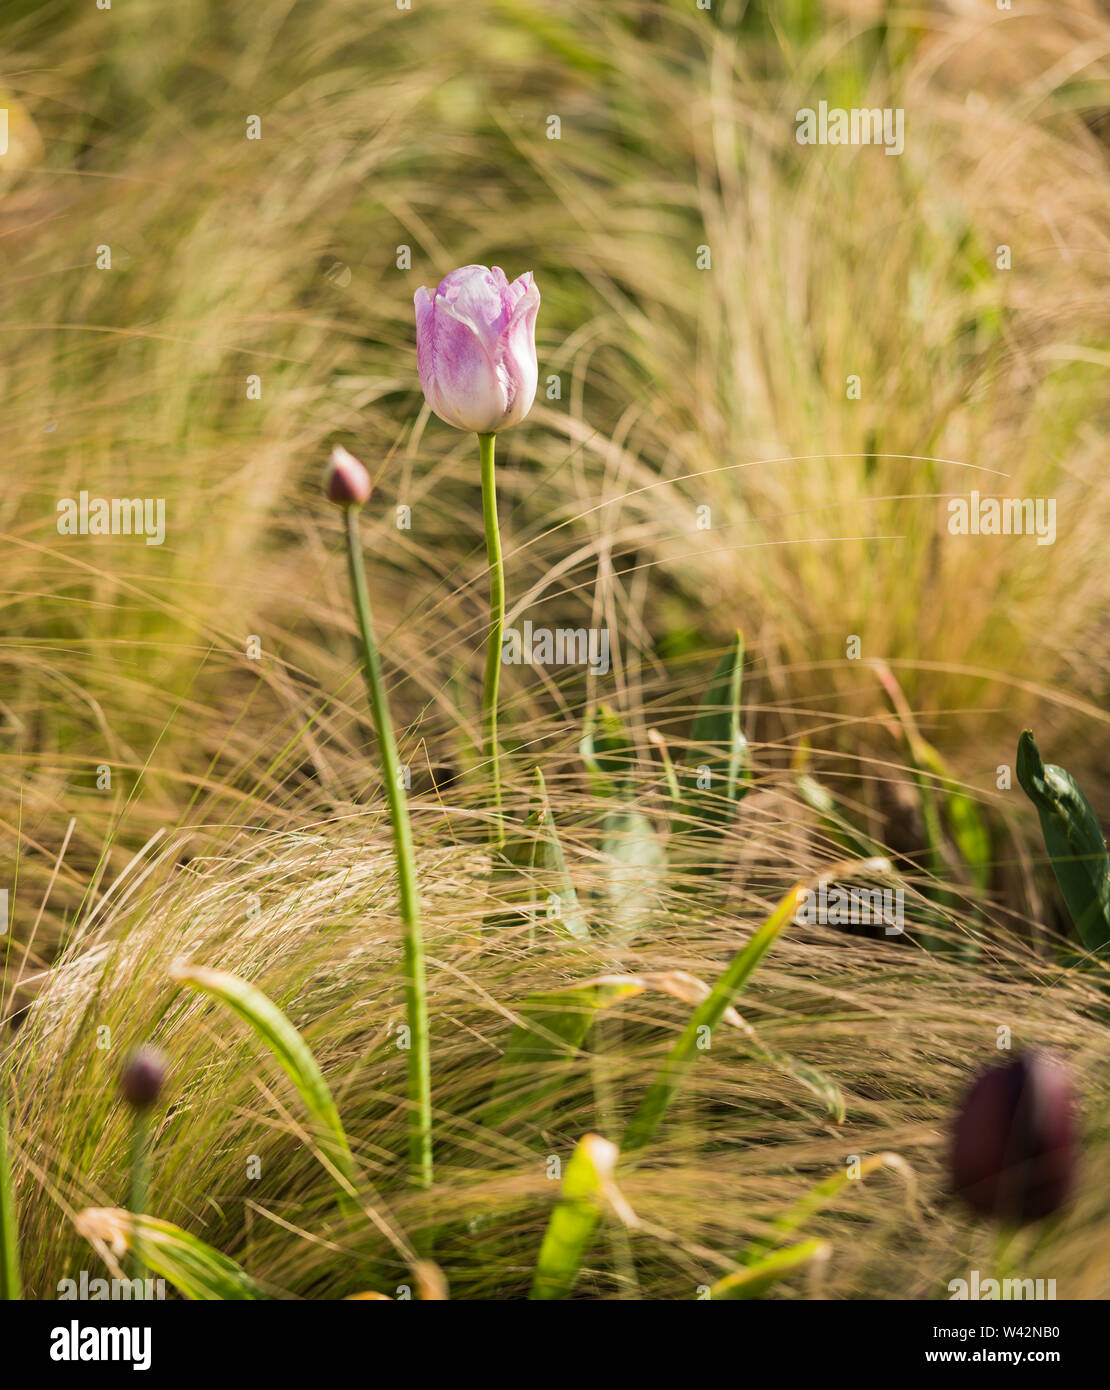 A single tulip in flower against an ornamental grass background.  Staffordshire England UK Stock Photo - Alamy